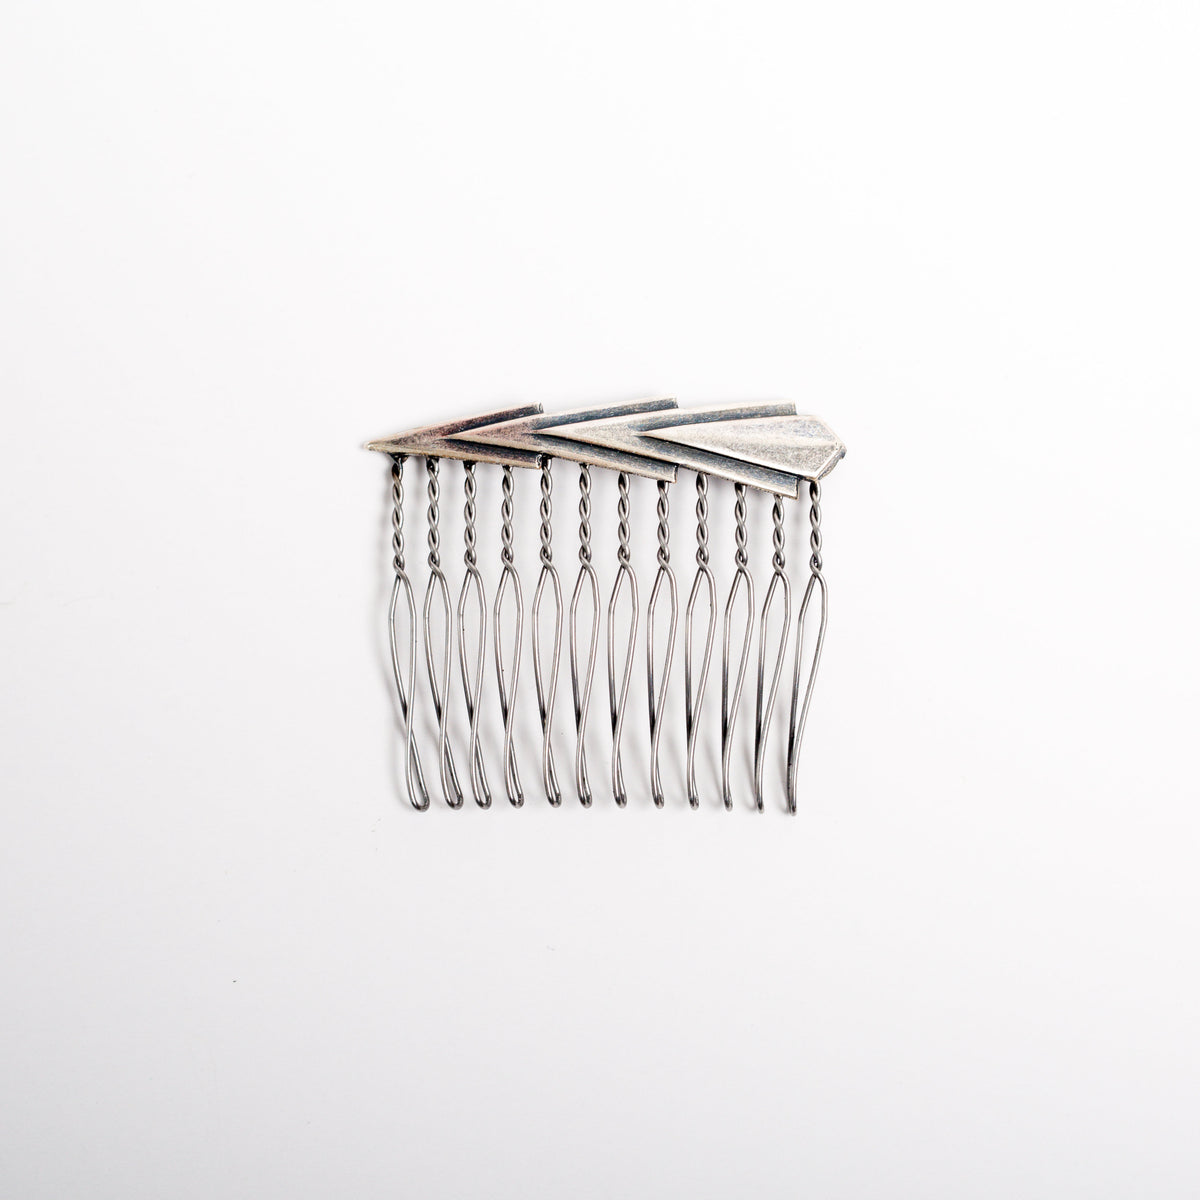 “To The Point’ Hair Combs